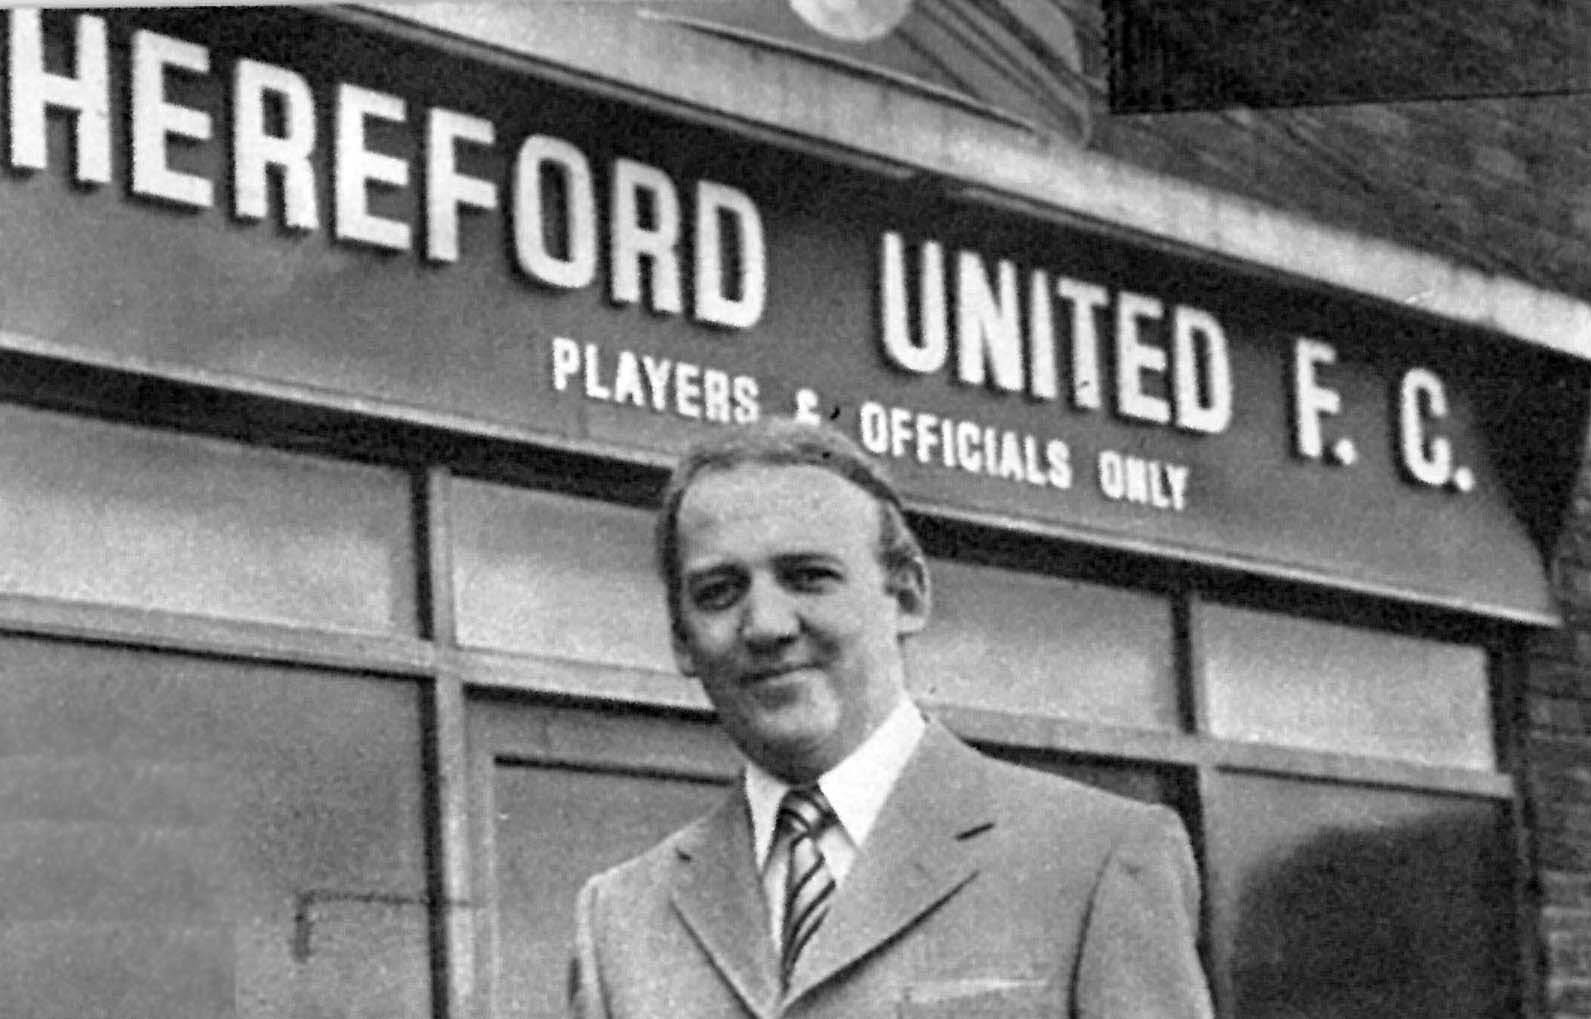 NEWS | Granddaughter of former Hereford United Chairman provided with photographic and video archive